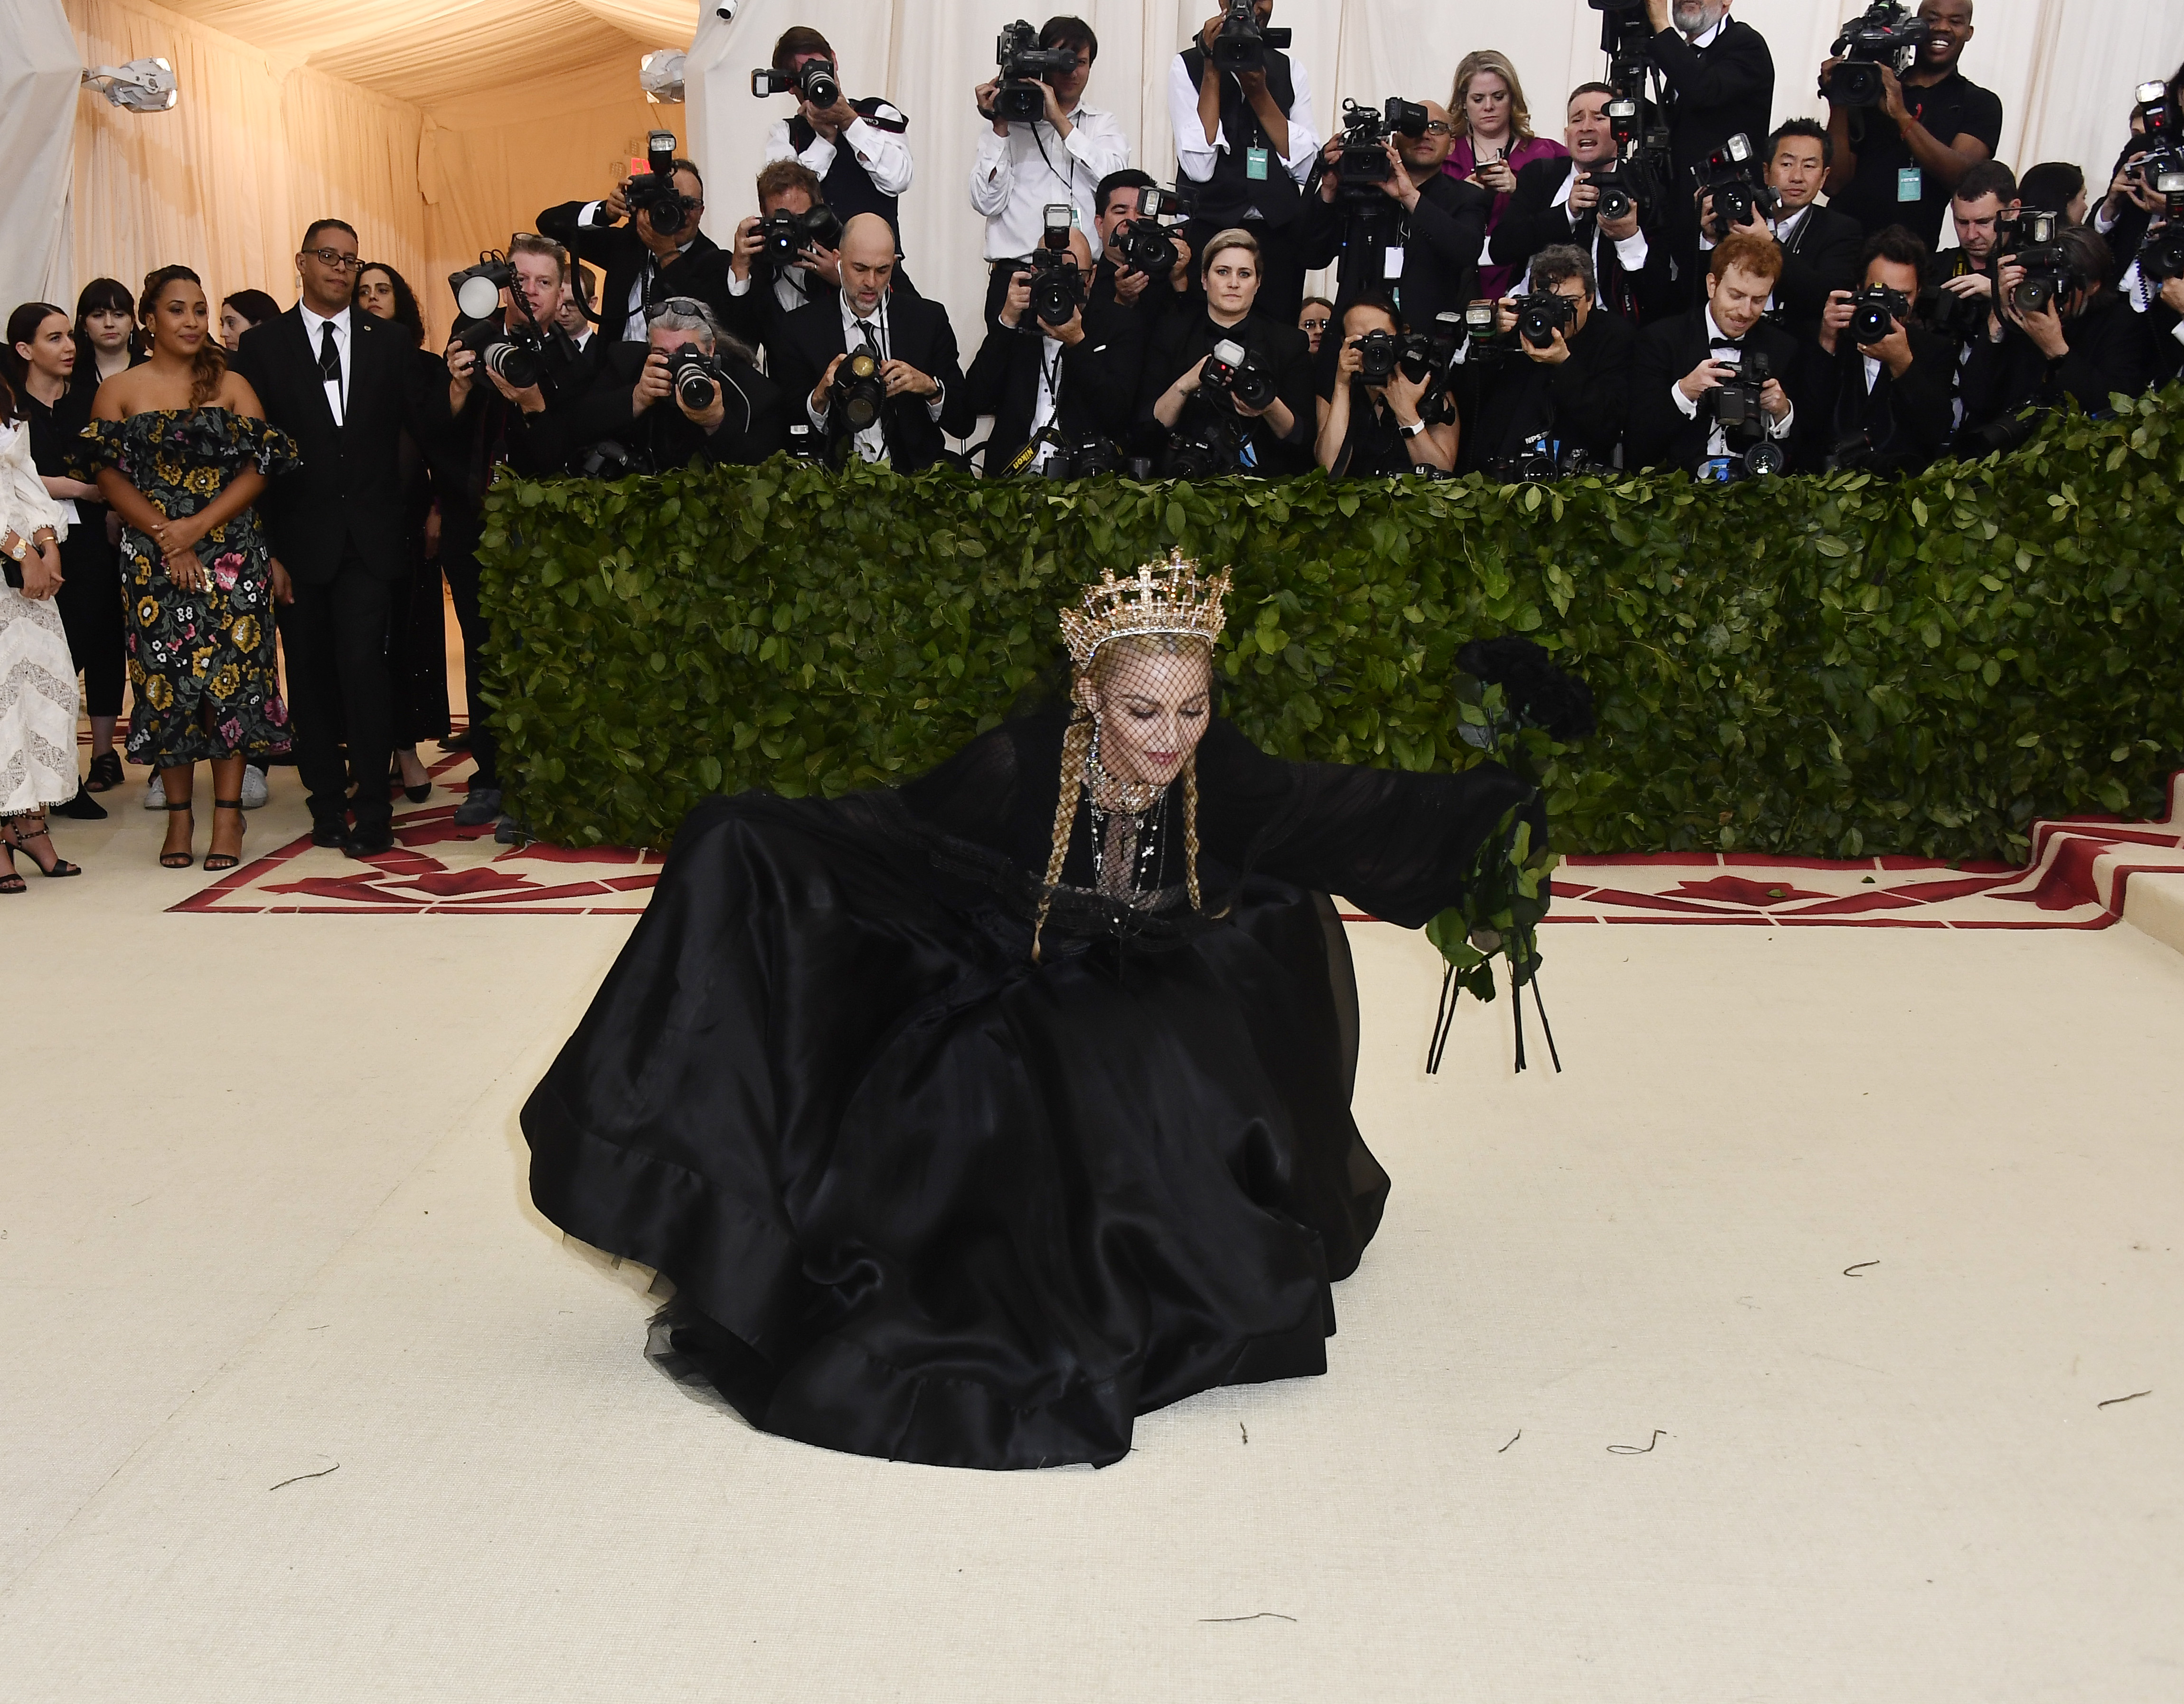 Covet, when are we going to have our Madonna MET Gala 2018 “Heavenly  Bodies” look? She even has bouquet!! : r/Covetfashion